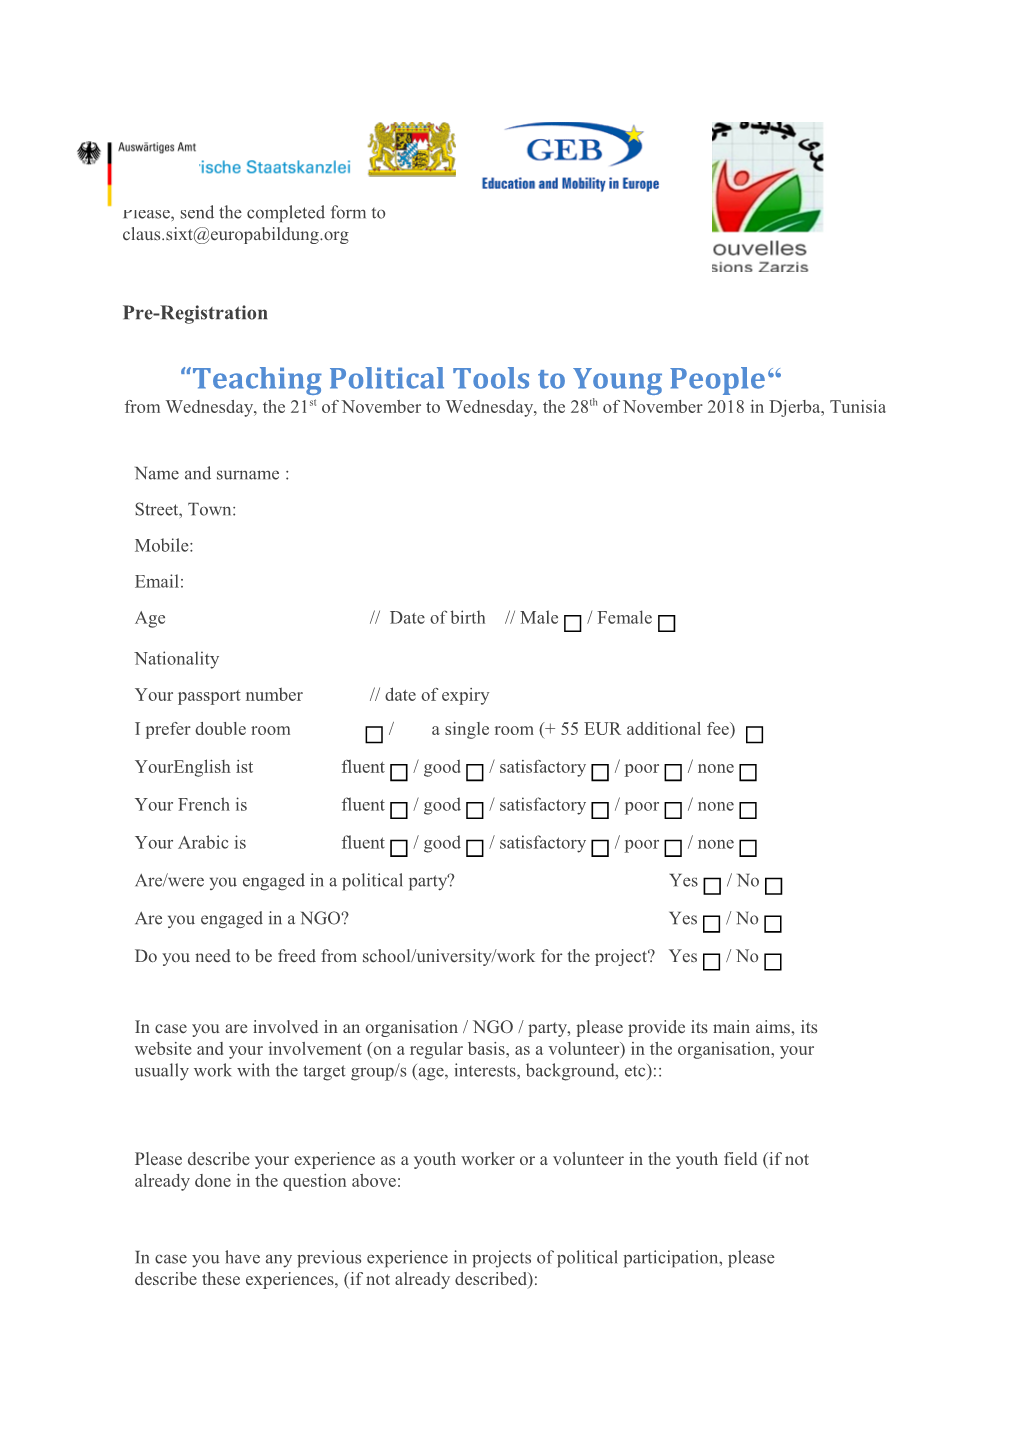 Teaching Political Tools to Young People